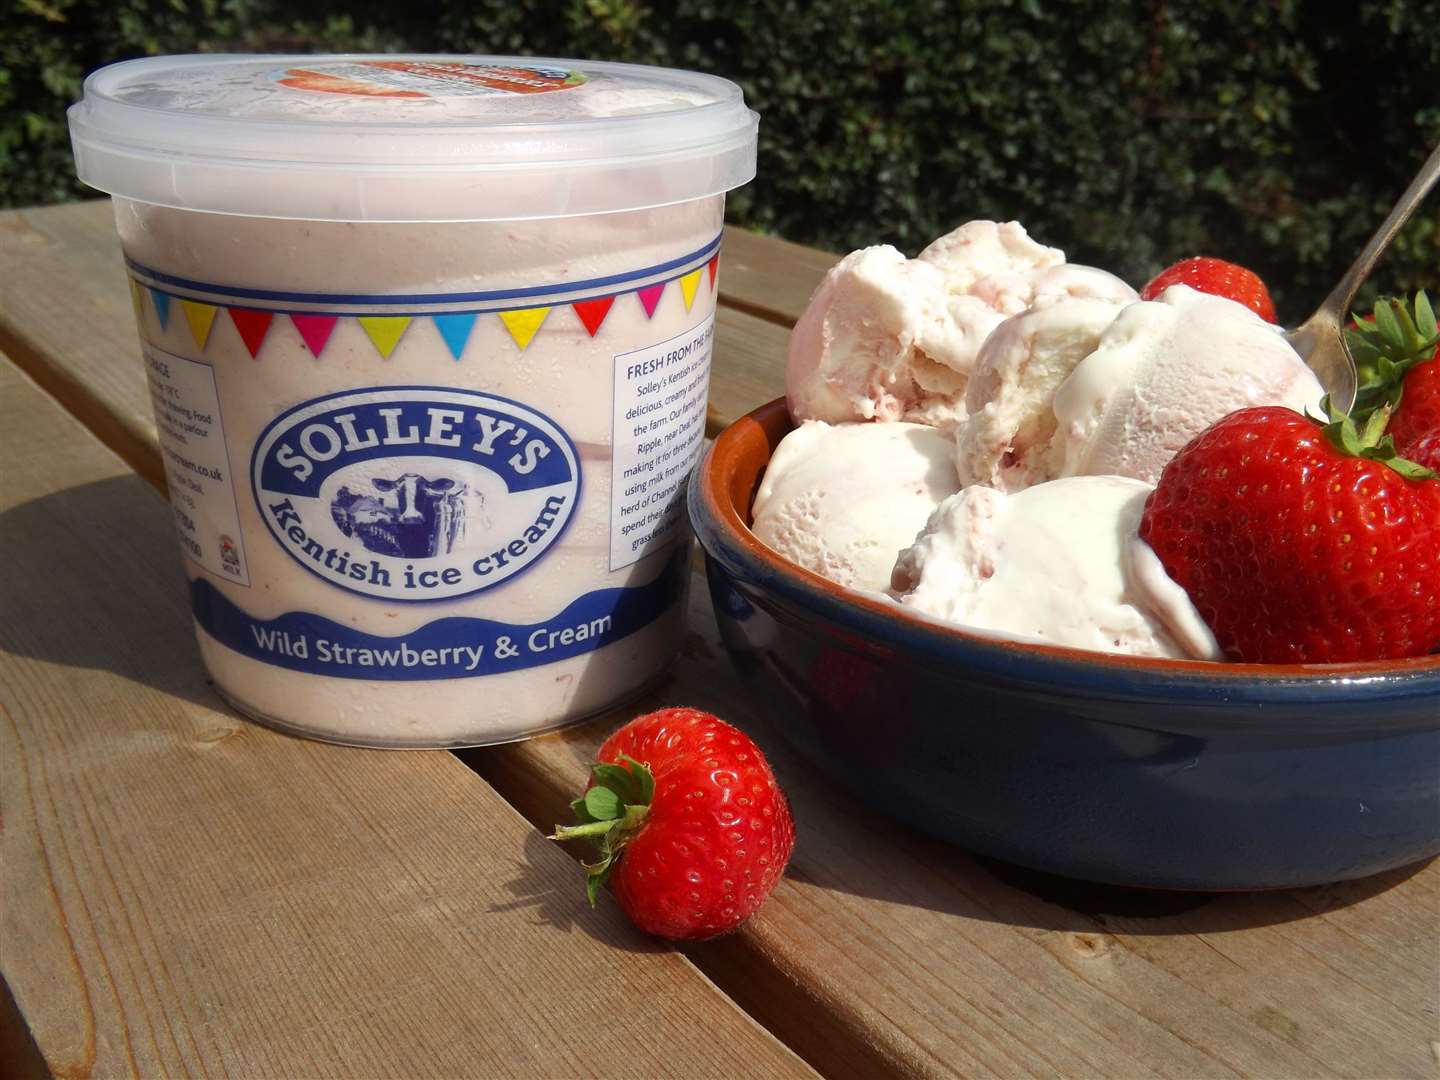 Solley's sells ice cream direct from the farm gate throughout the summer